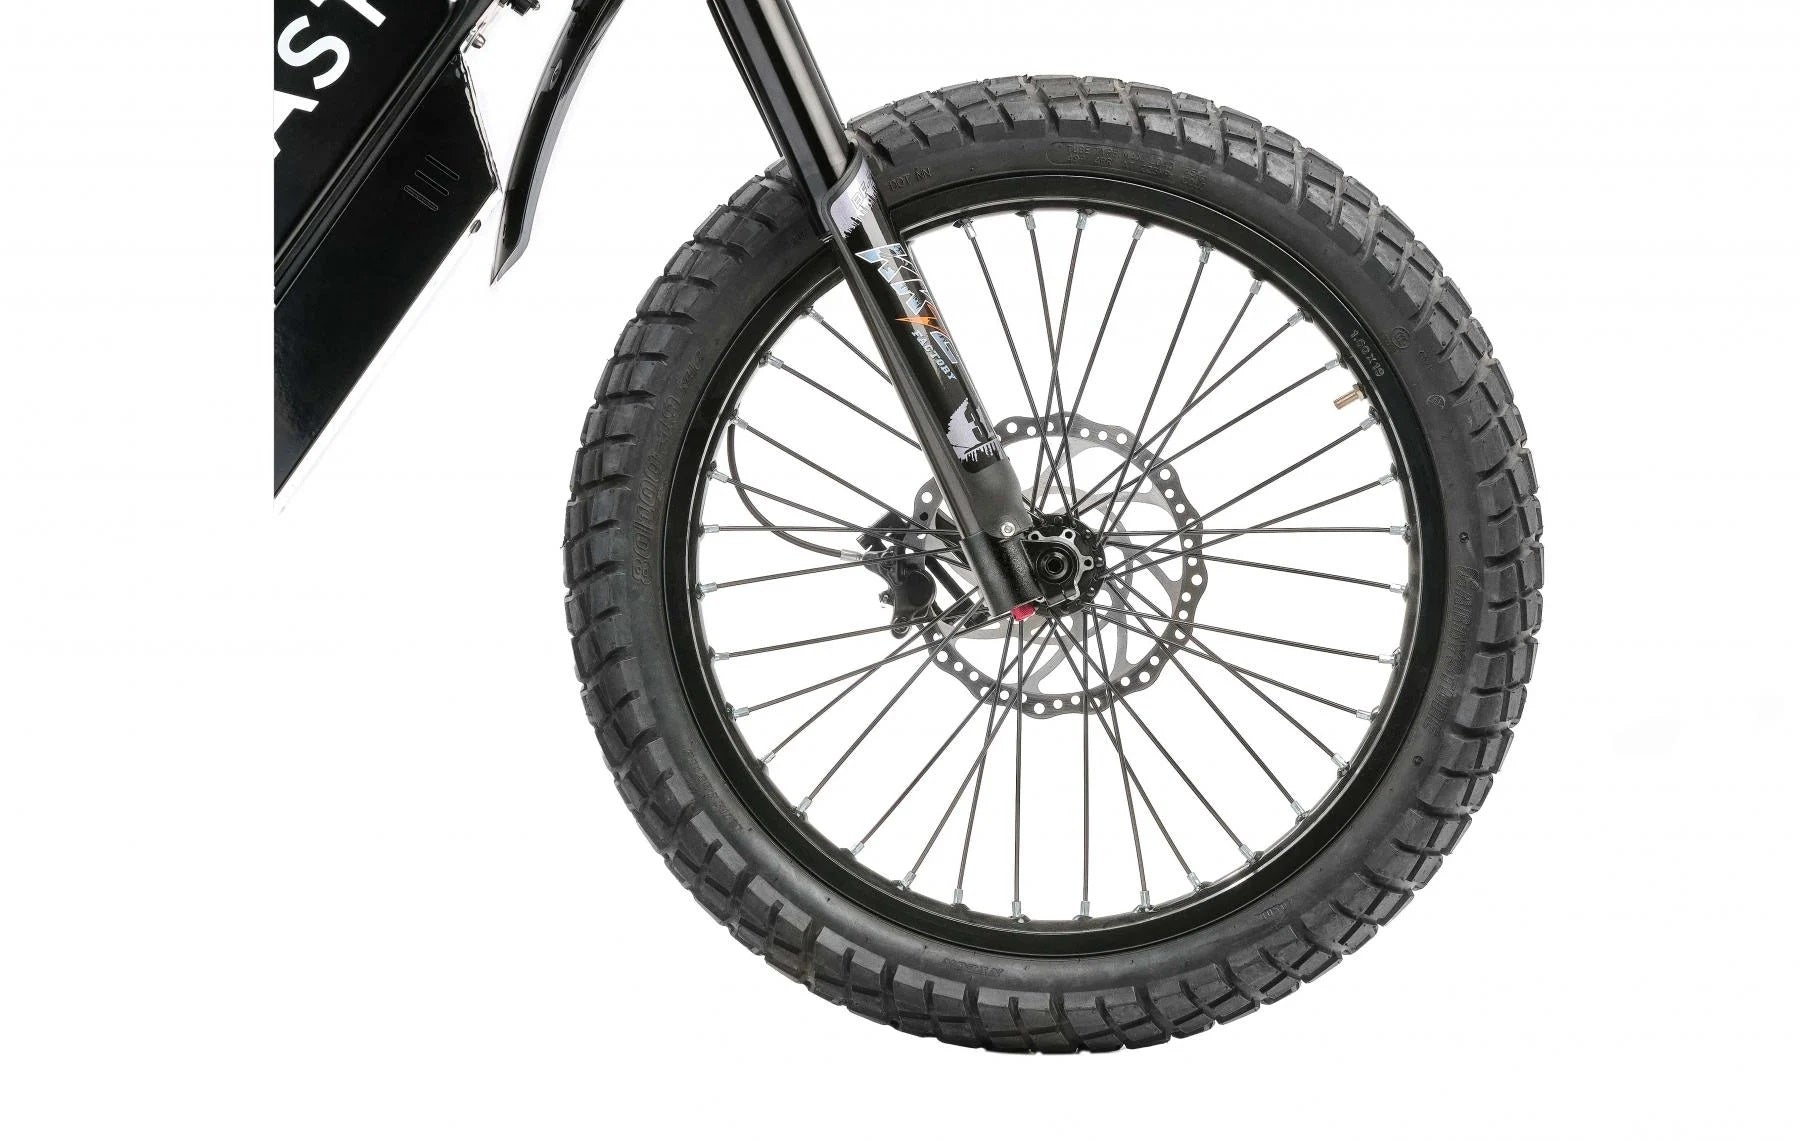 Delfast Top 3.0 ebike has two options of wheels: motor wheels (as on the picture) and dirt cross wheels for offroad adventures! Come and pick the ones you like to go outside and explore the roads, and mostly to have fun with this eBike beast!